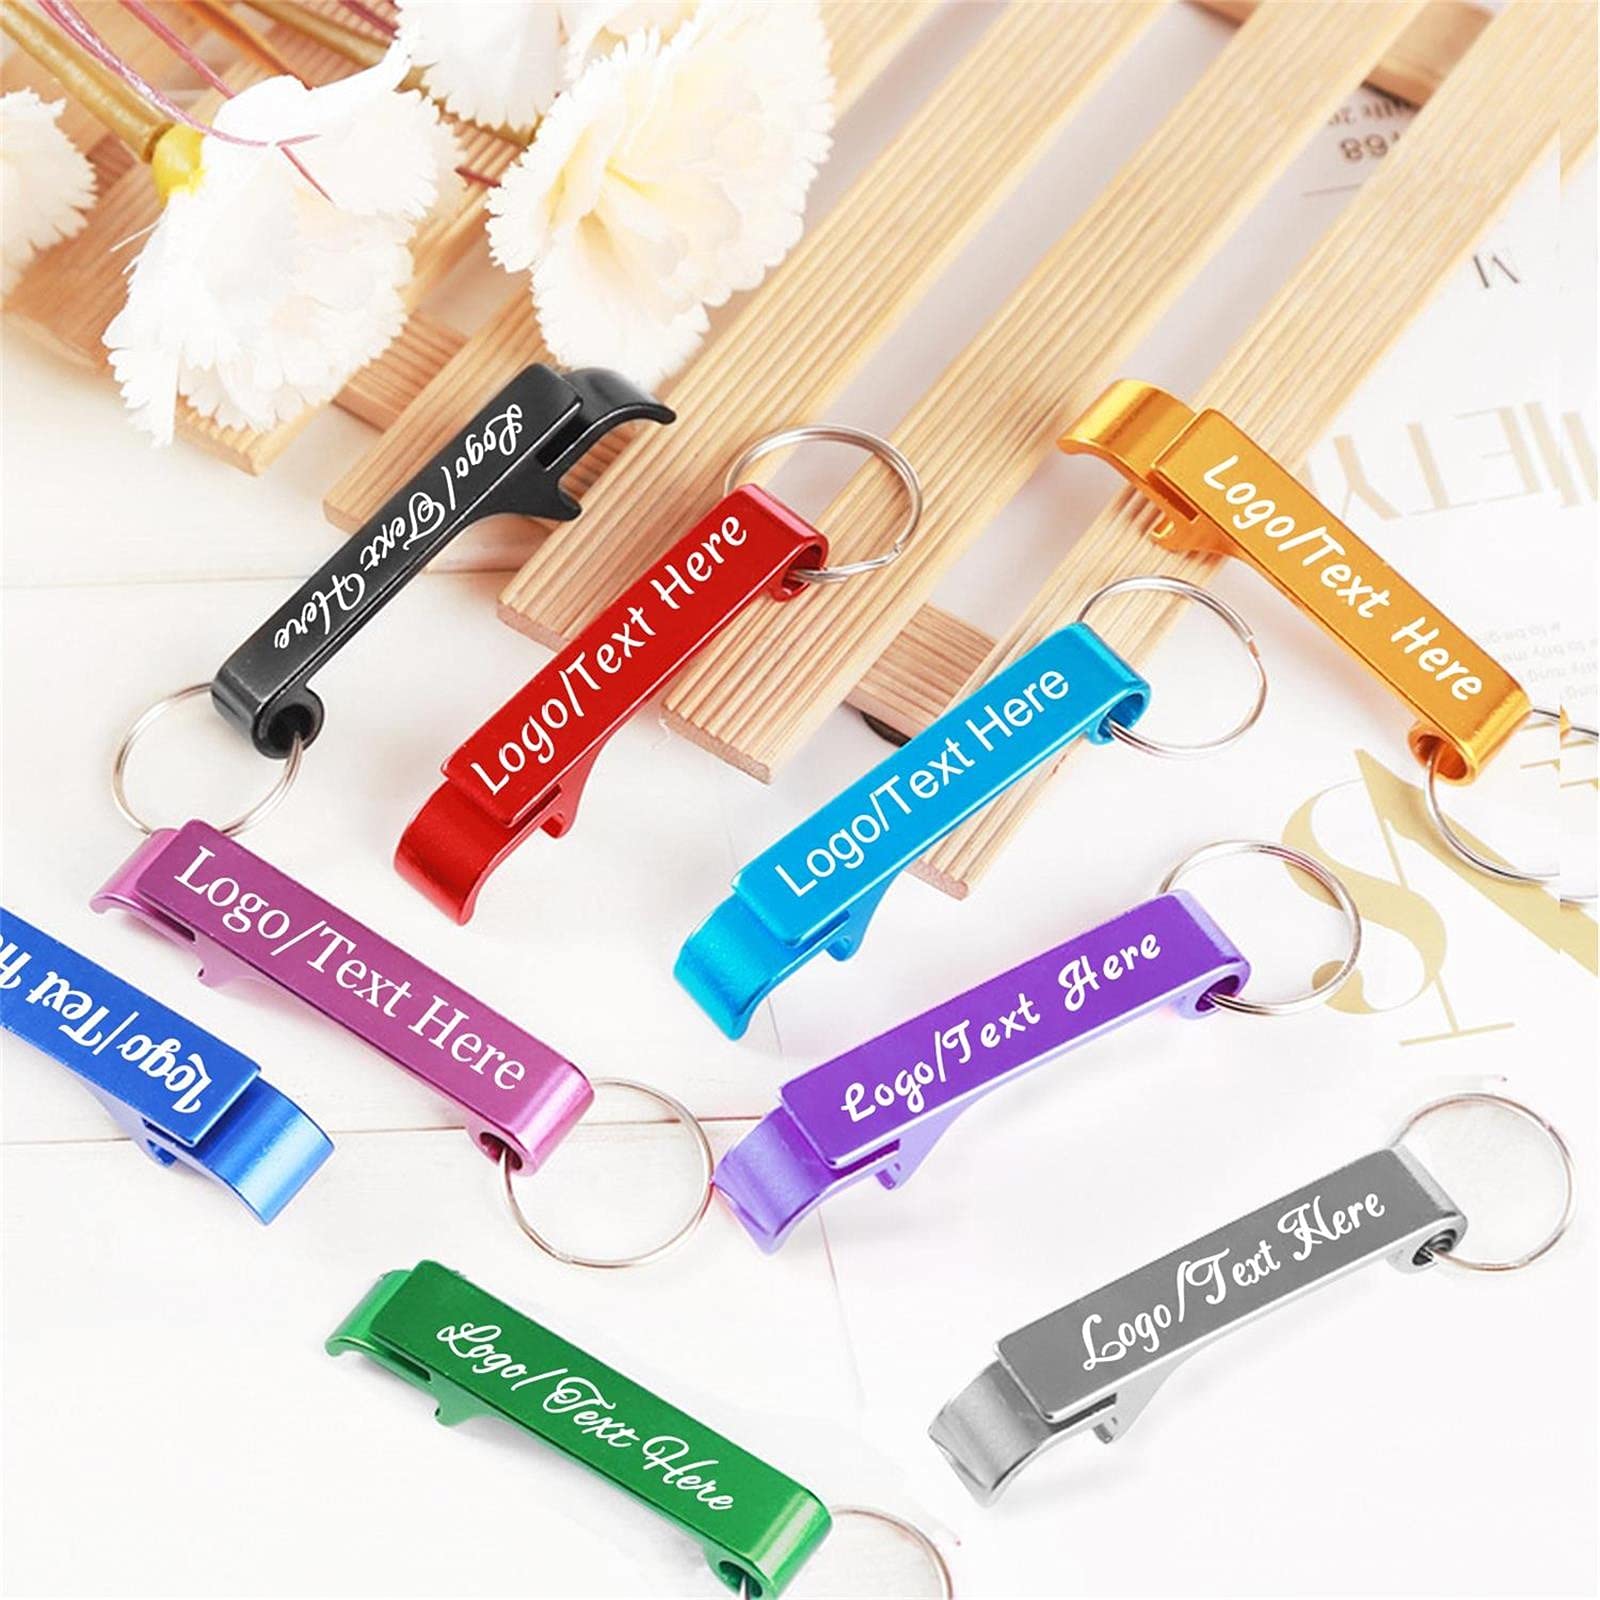 100pcs Personalized Custom Bottle Opener Keychain Bulk for Men Women,Customized Metal Can Beer Bottle Opener Wedding Party Favors,Engraved with Logo,Text